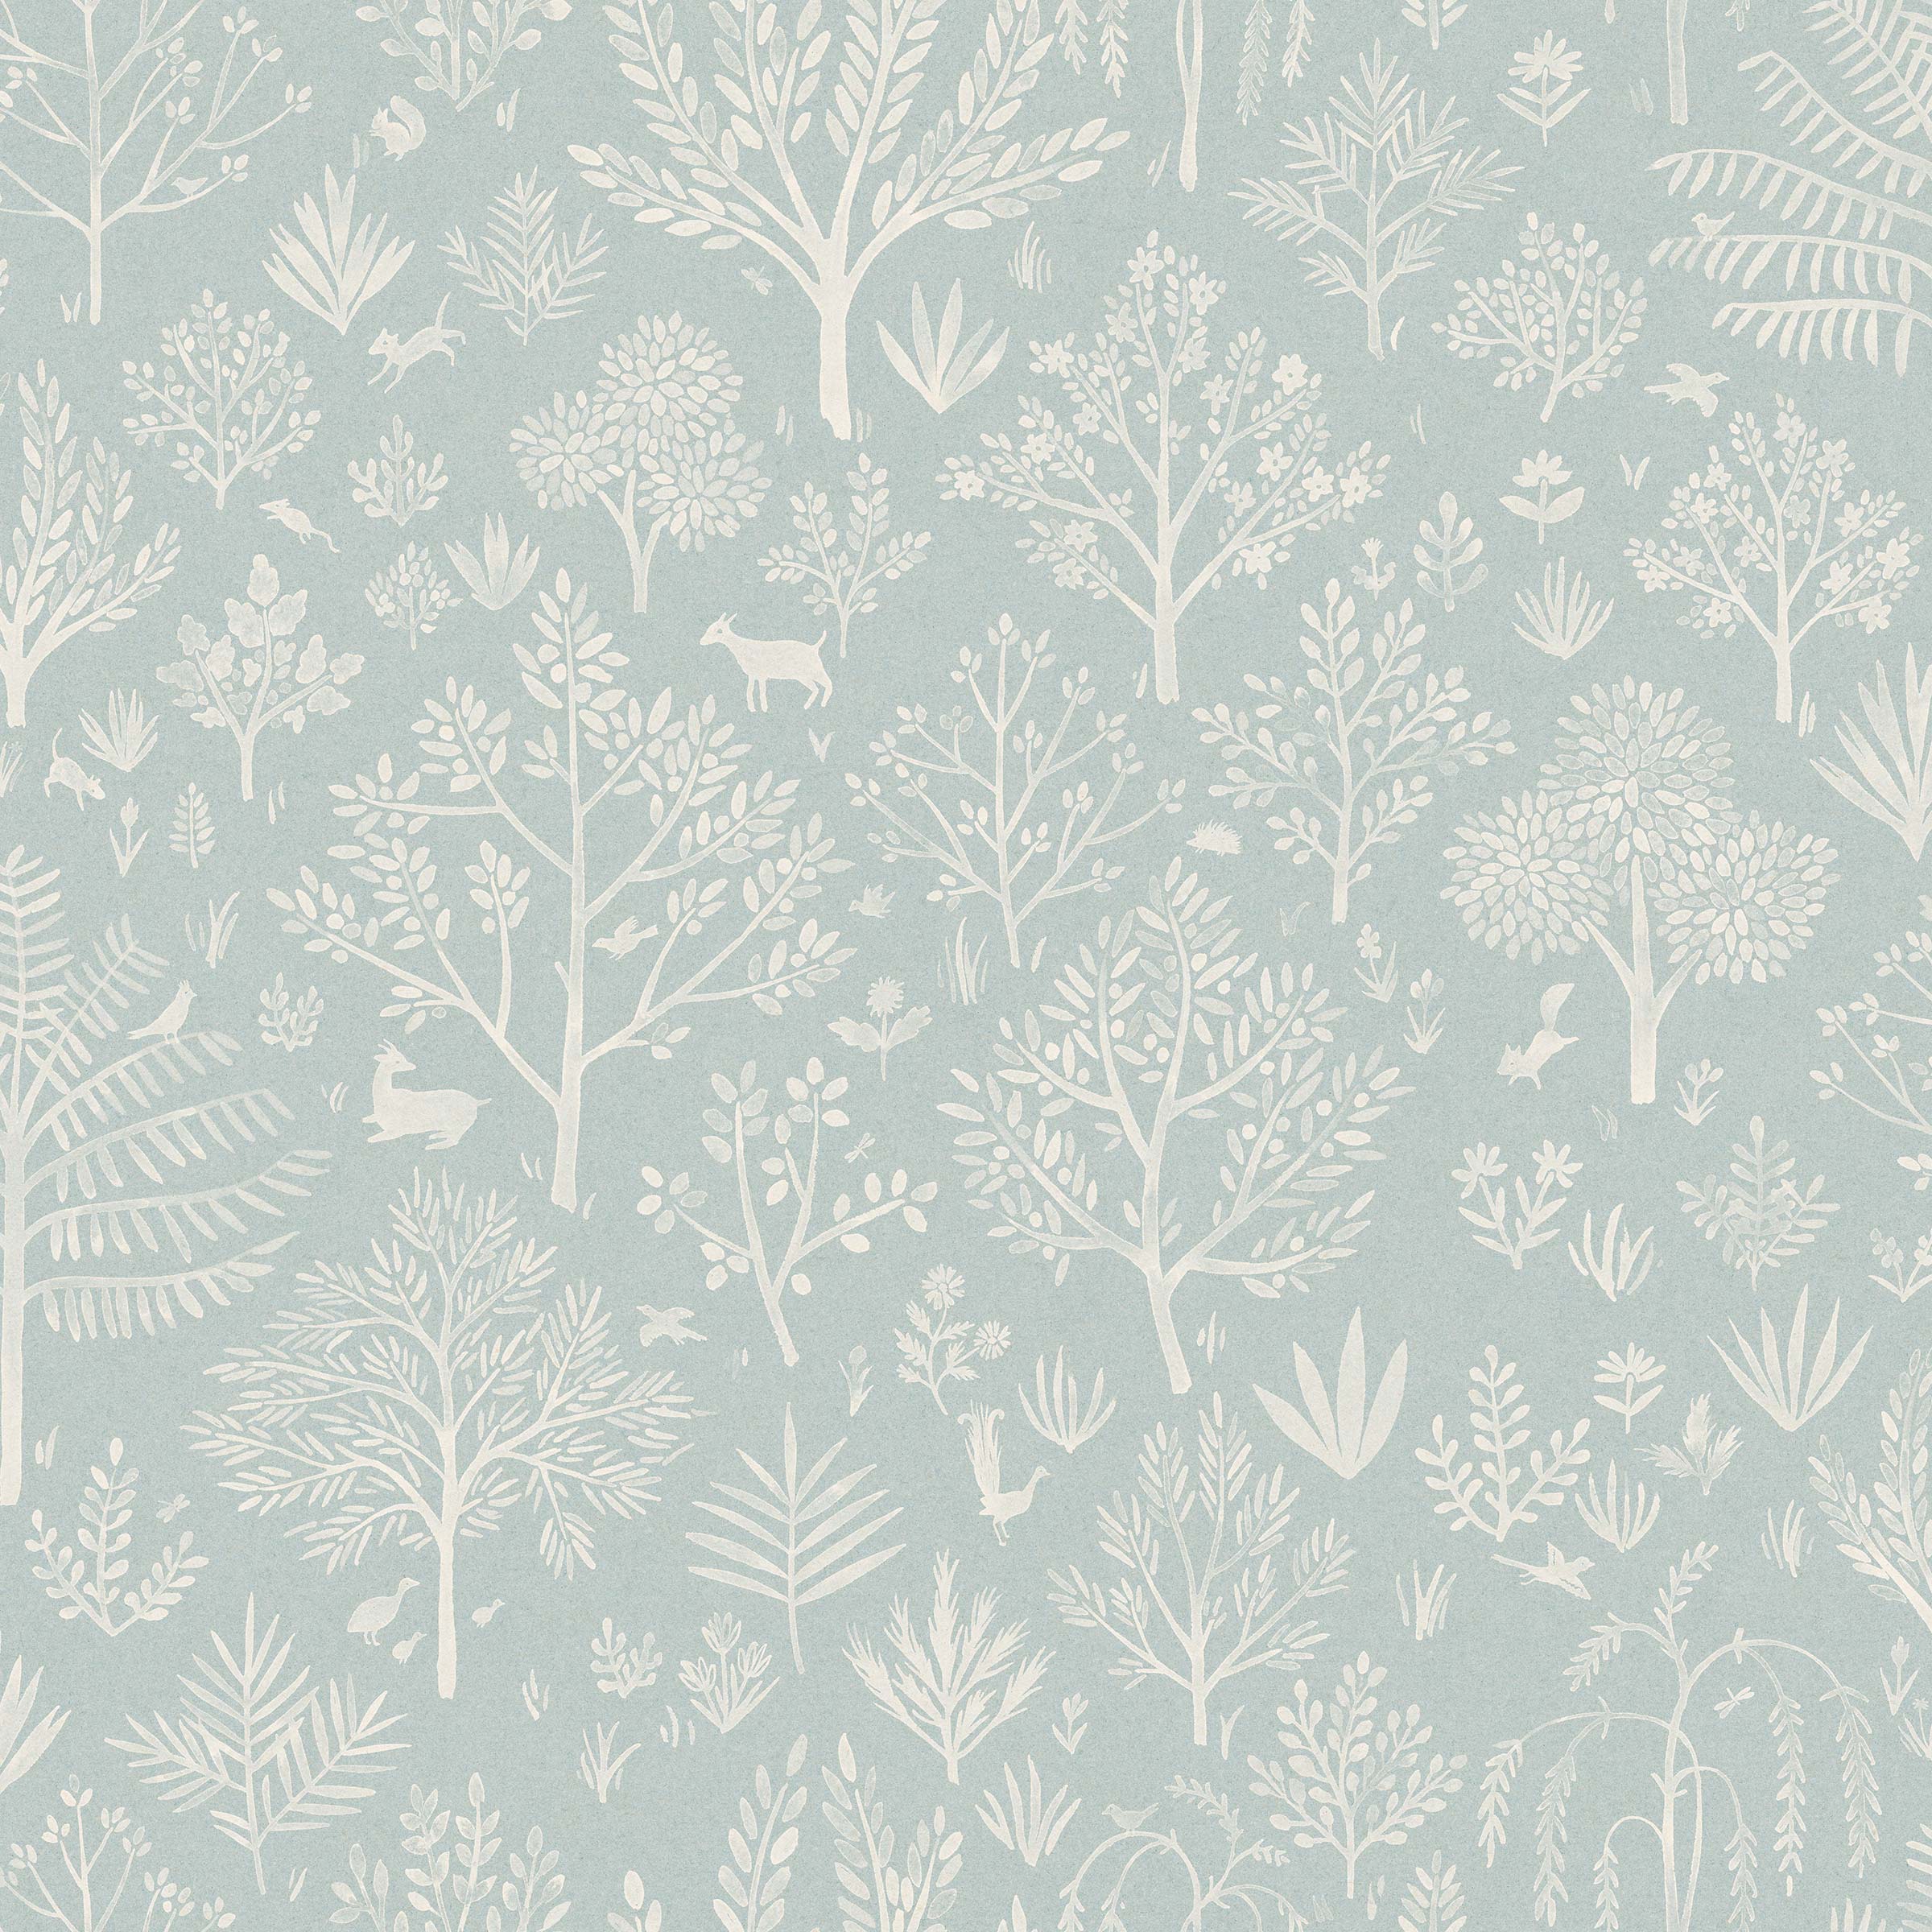 Detail of wallpaper in a playful animal and tree print in white on a light blue field.